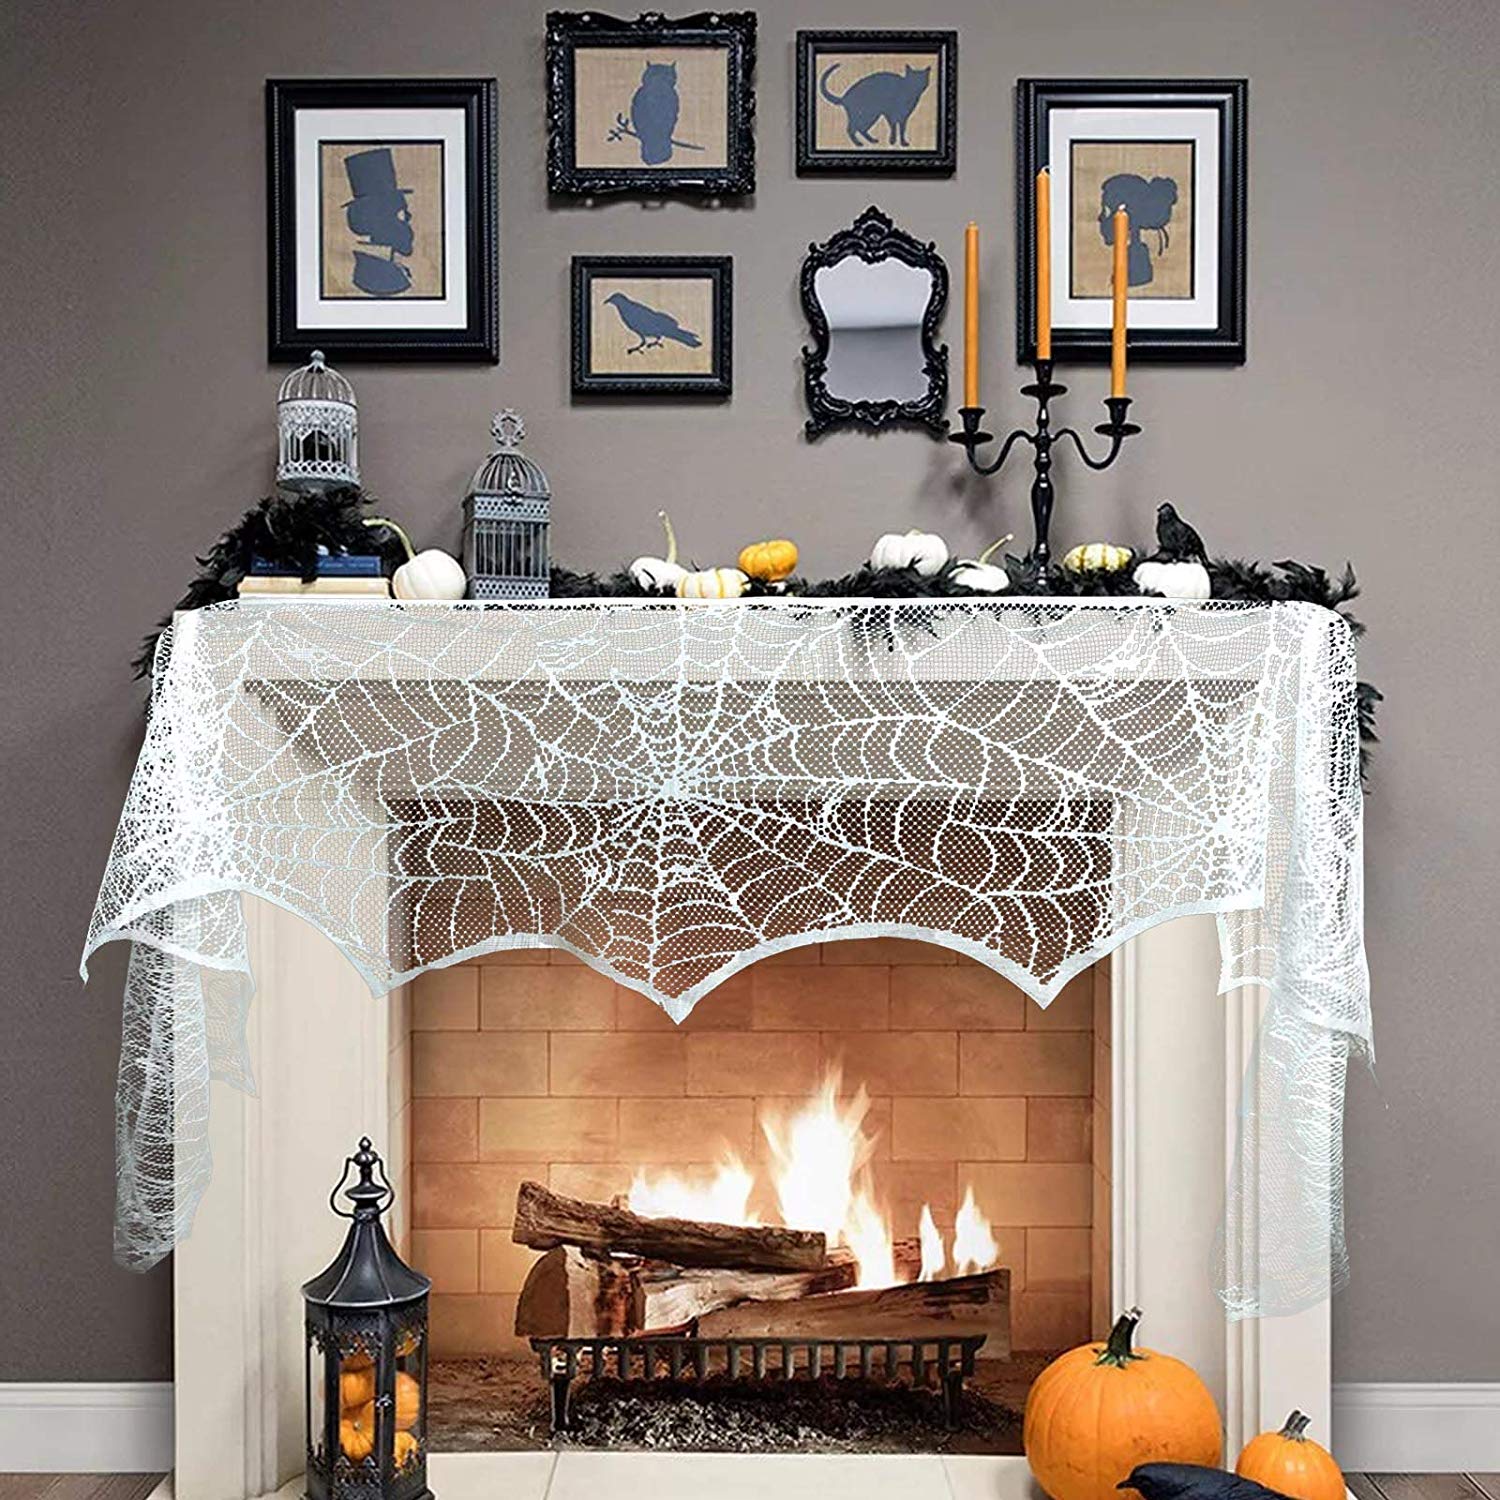 How to Decorate An Unused Fireplace New Amazon Vlovelife 18 X 96 Halloween Decorations